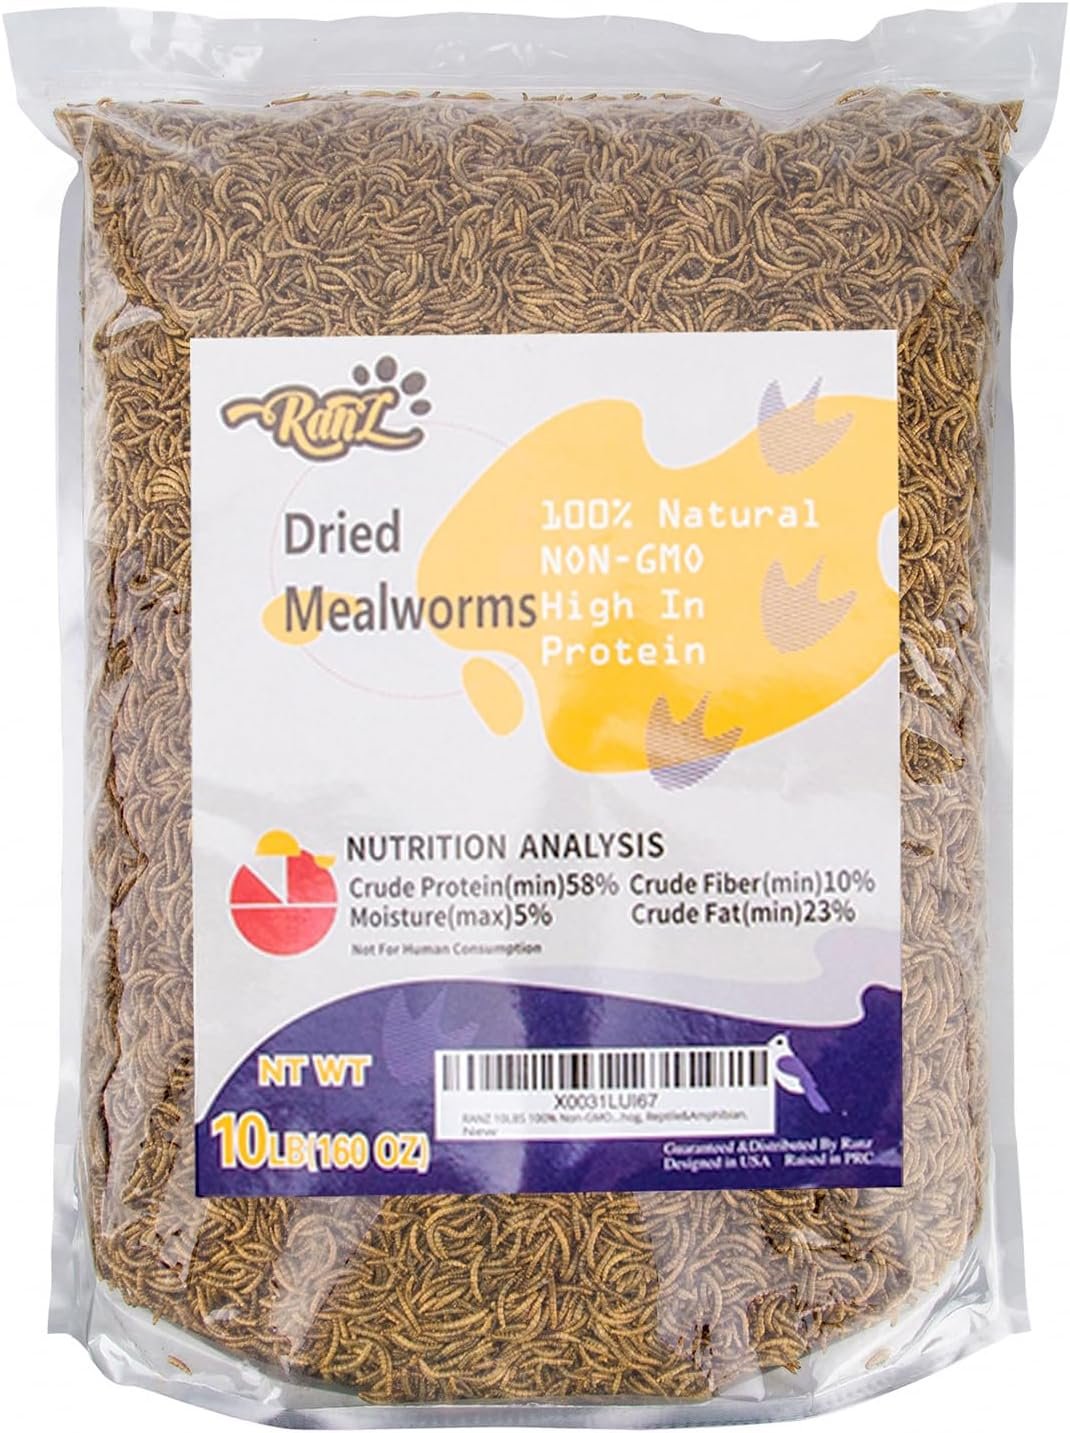 RANZ 10LBS Non-GMO Dried Mealworms for Chickens, High Protein Meal Worms, Whole Large Mealworms for Wild Birds, Ducks, Hedgehogs, Reptiles. Premium Chicken Feed, Perfect Bird Food and Chicken Treats